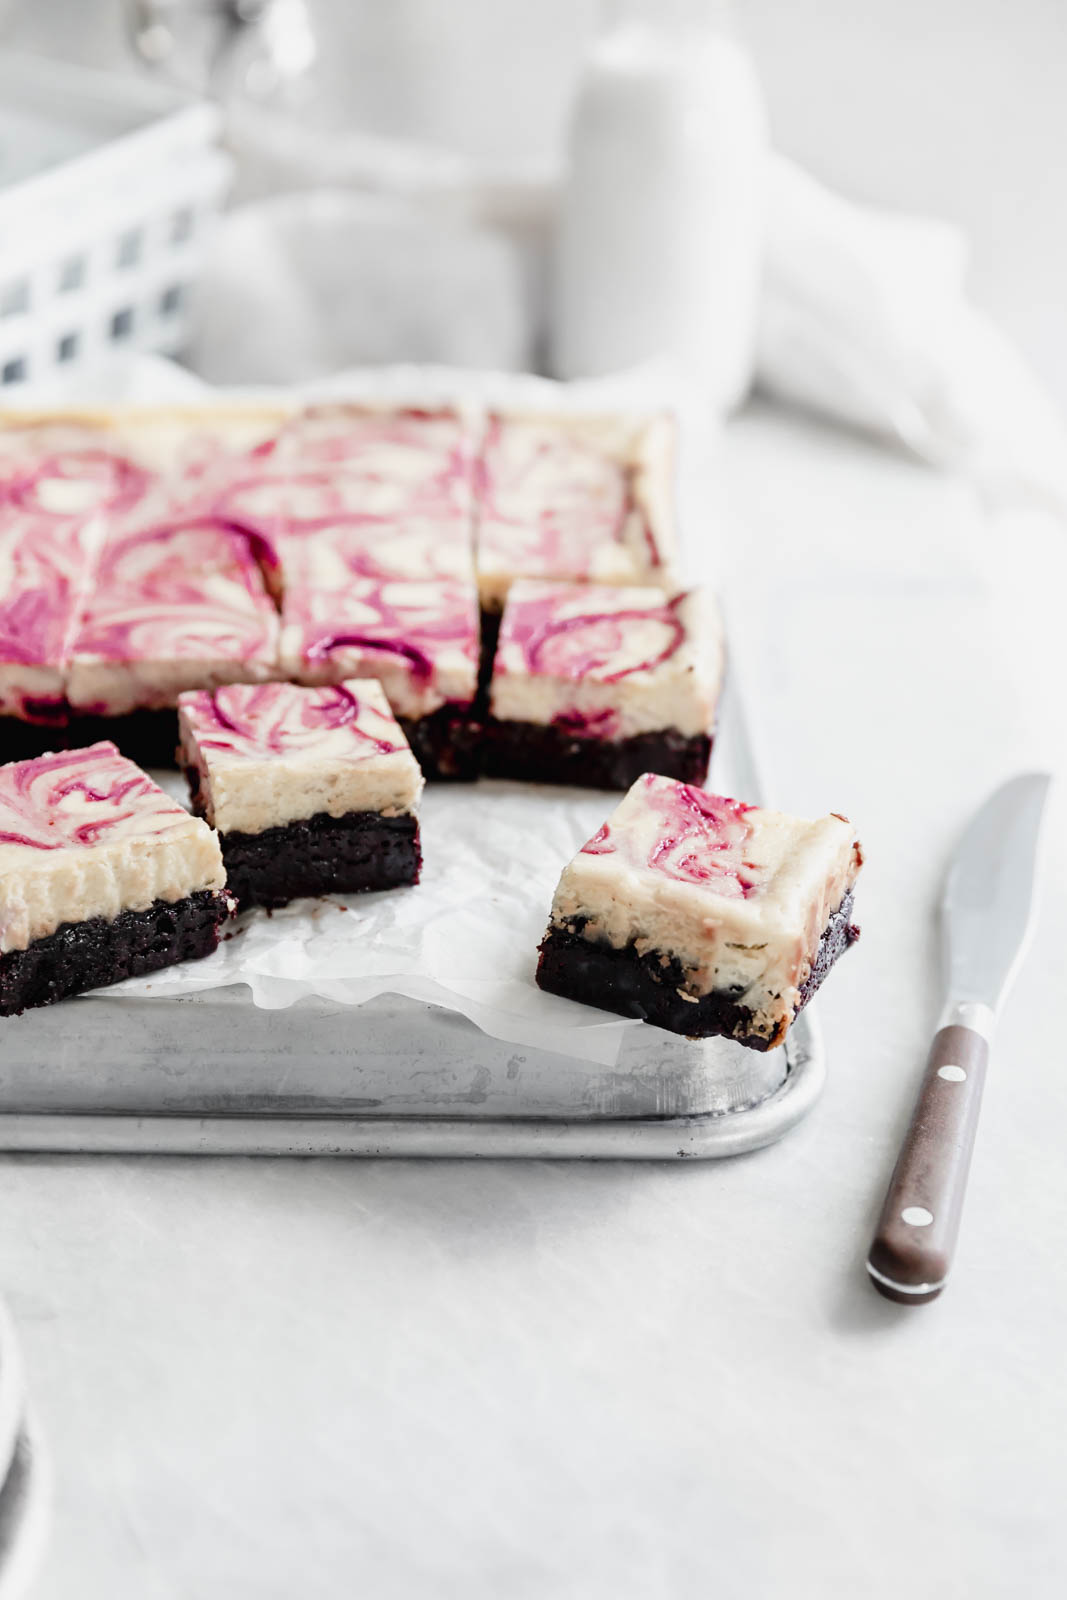 Rich fudge brownies topped with creamy cheesecake and a sinful black cherry swirl. Easy to make and even easier to devour.